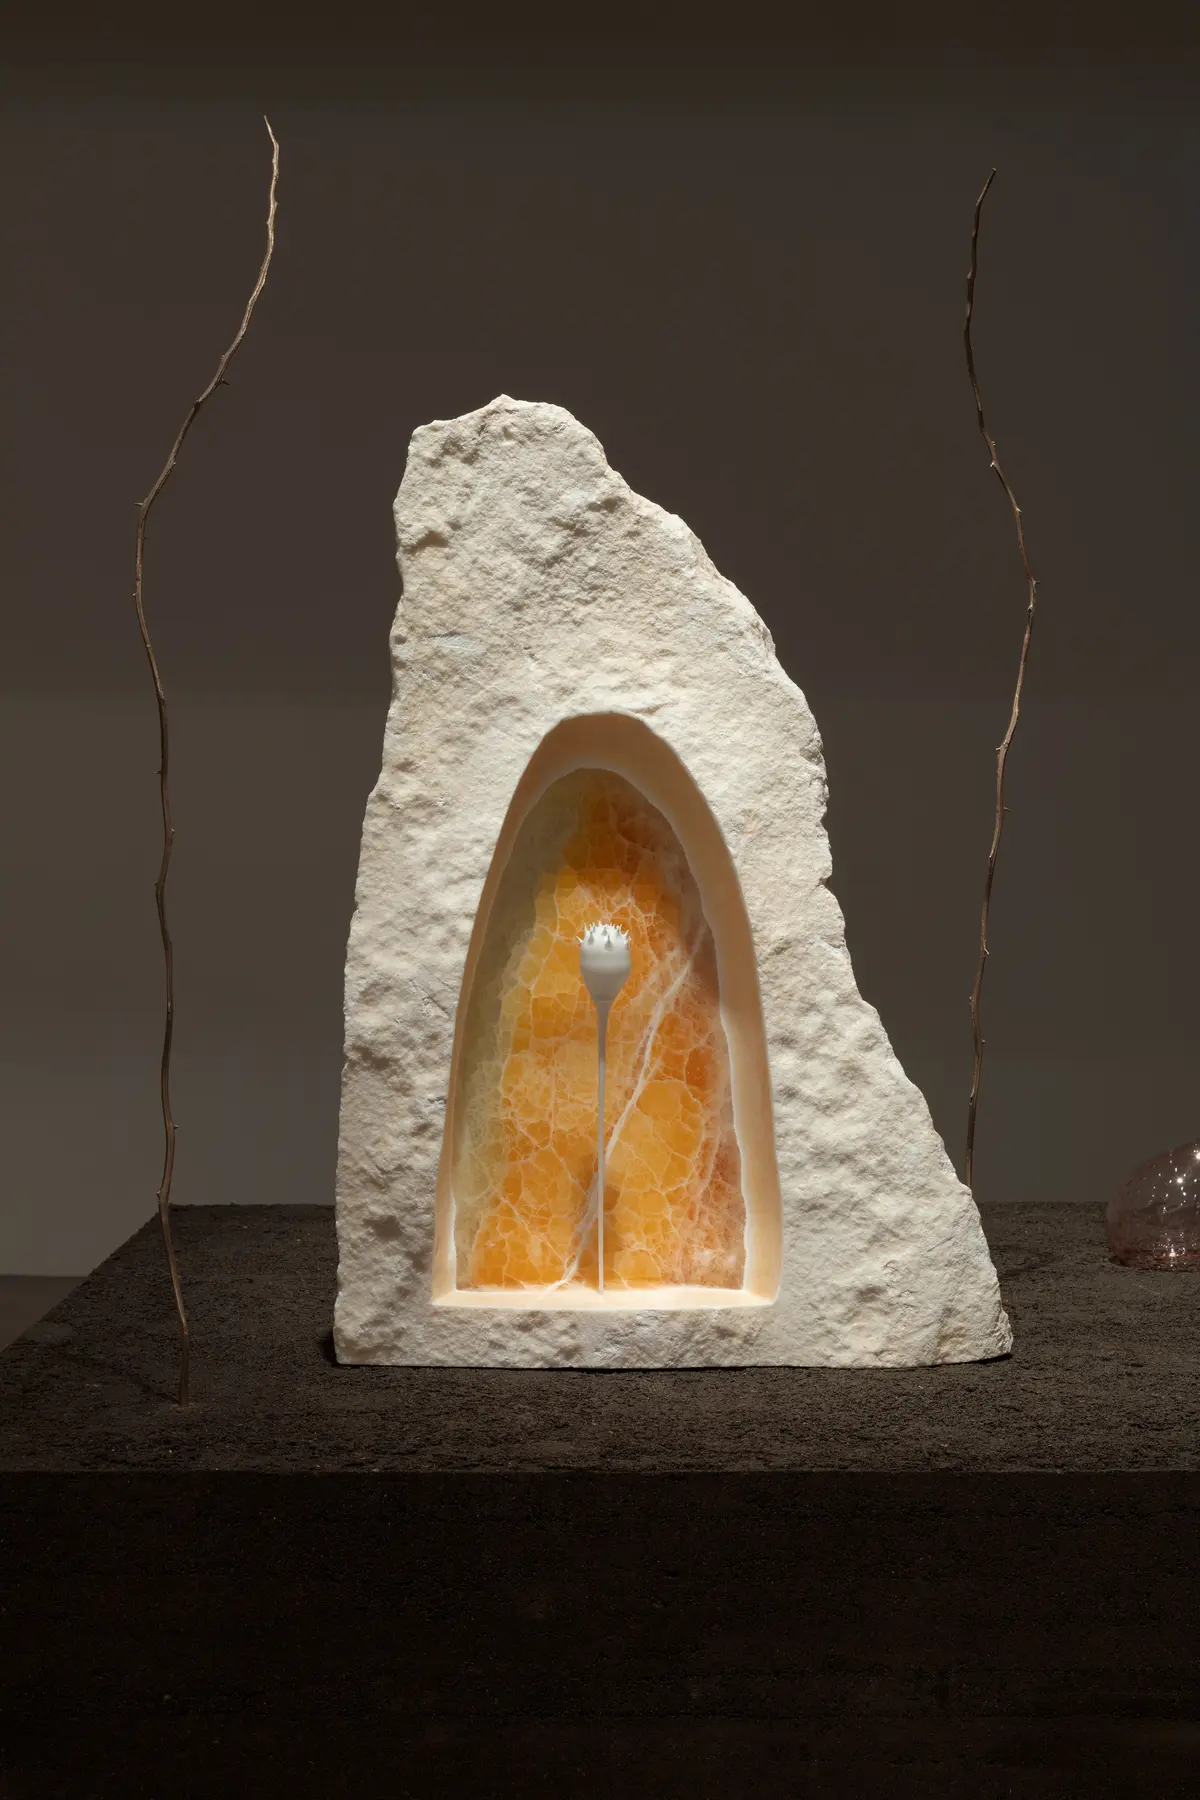 A cave-like white rock with amber interior. Twigs adorn the sides against a brown background.